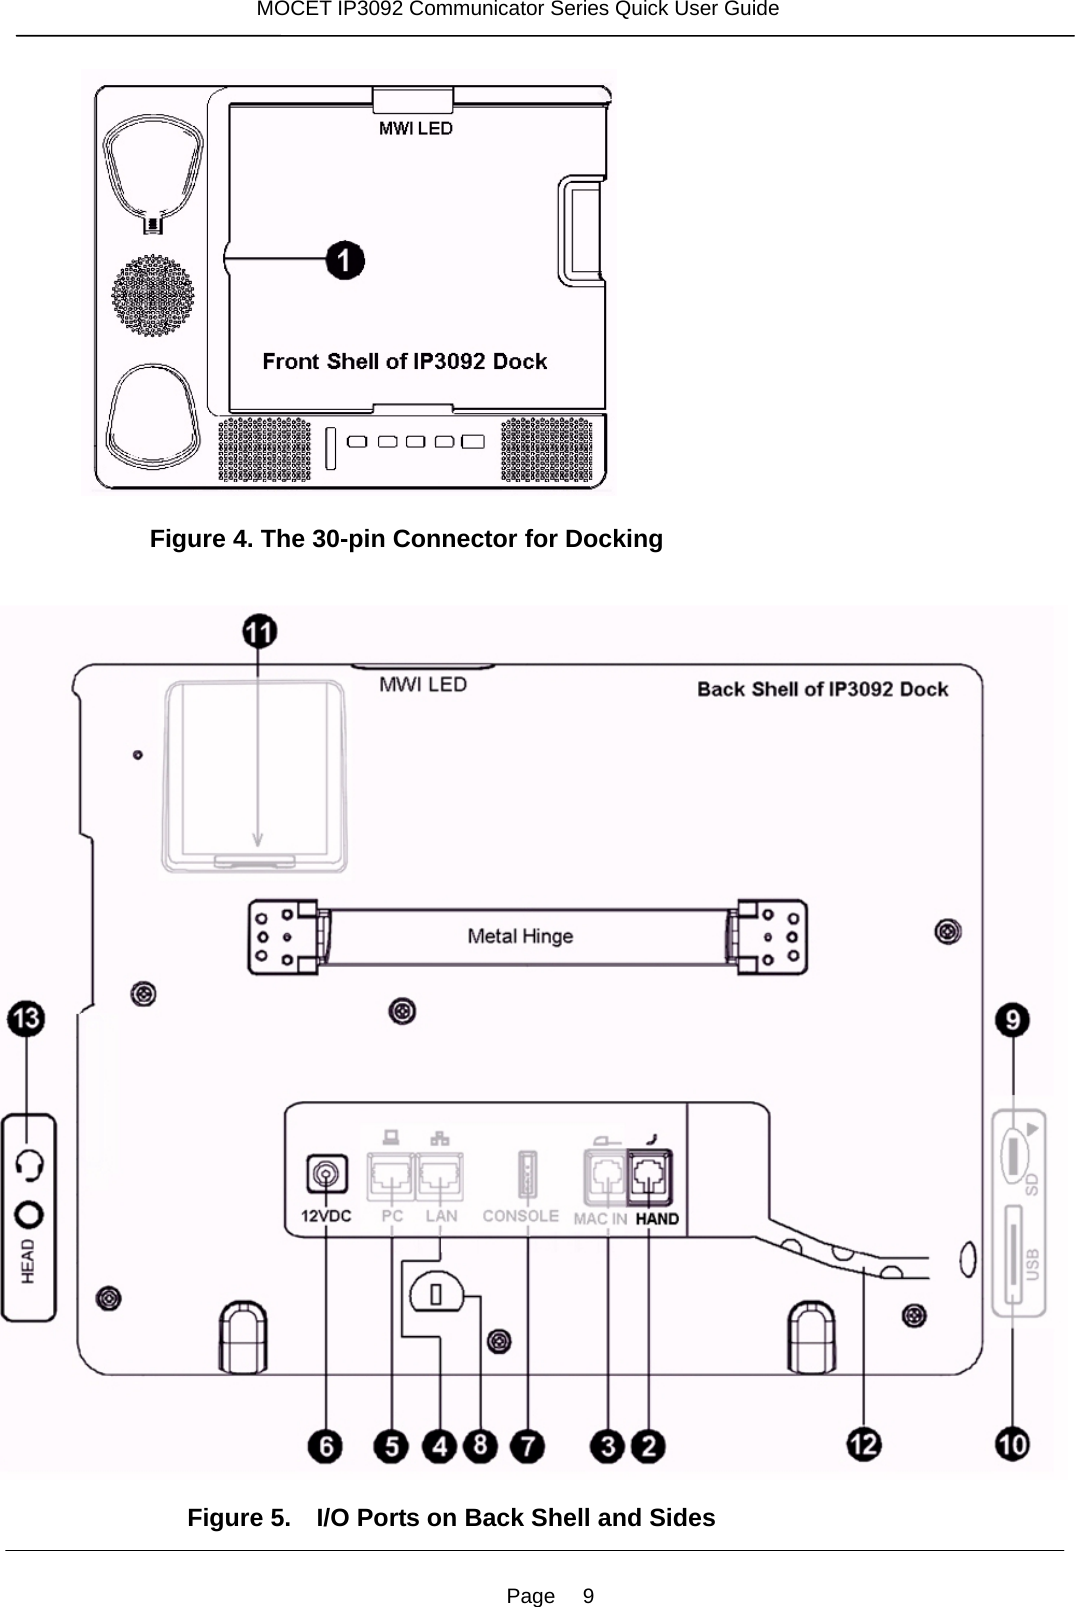 Page   9 MOCET IP3092 Communicator Series Quick User Guide    Figure 4. The 30-pin Connector for Docking       Figure 5.    I/O Ports on Back Shell and Sides 